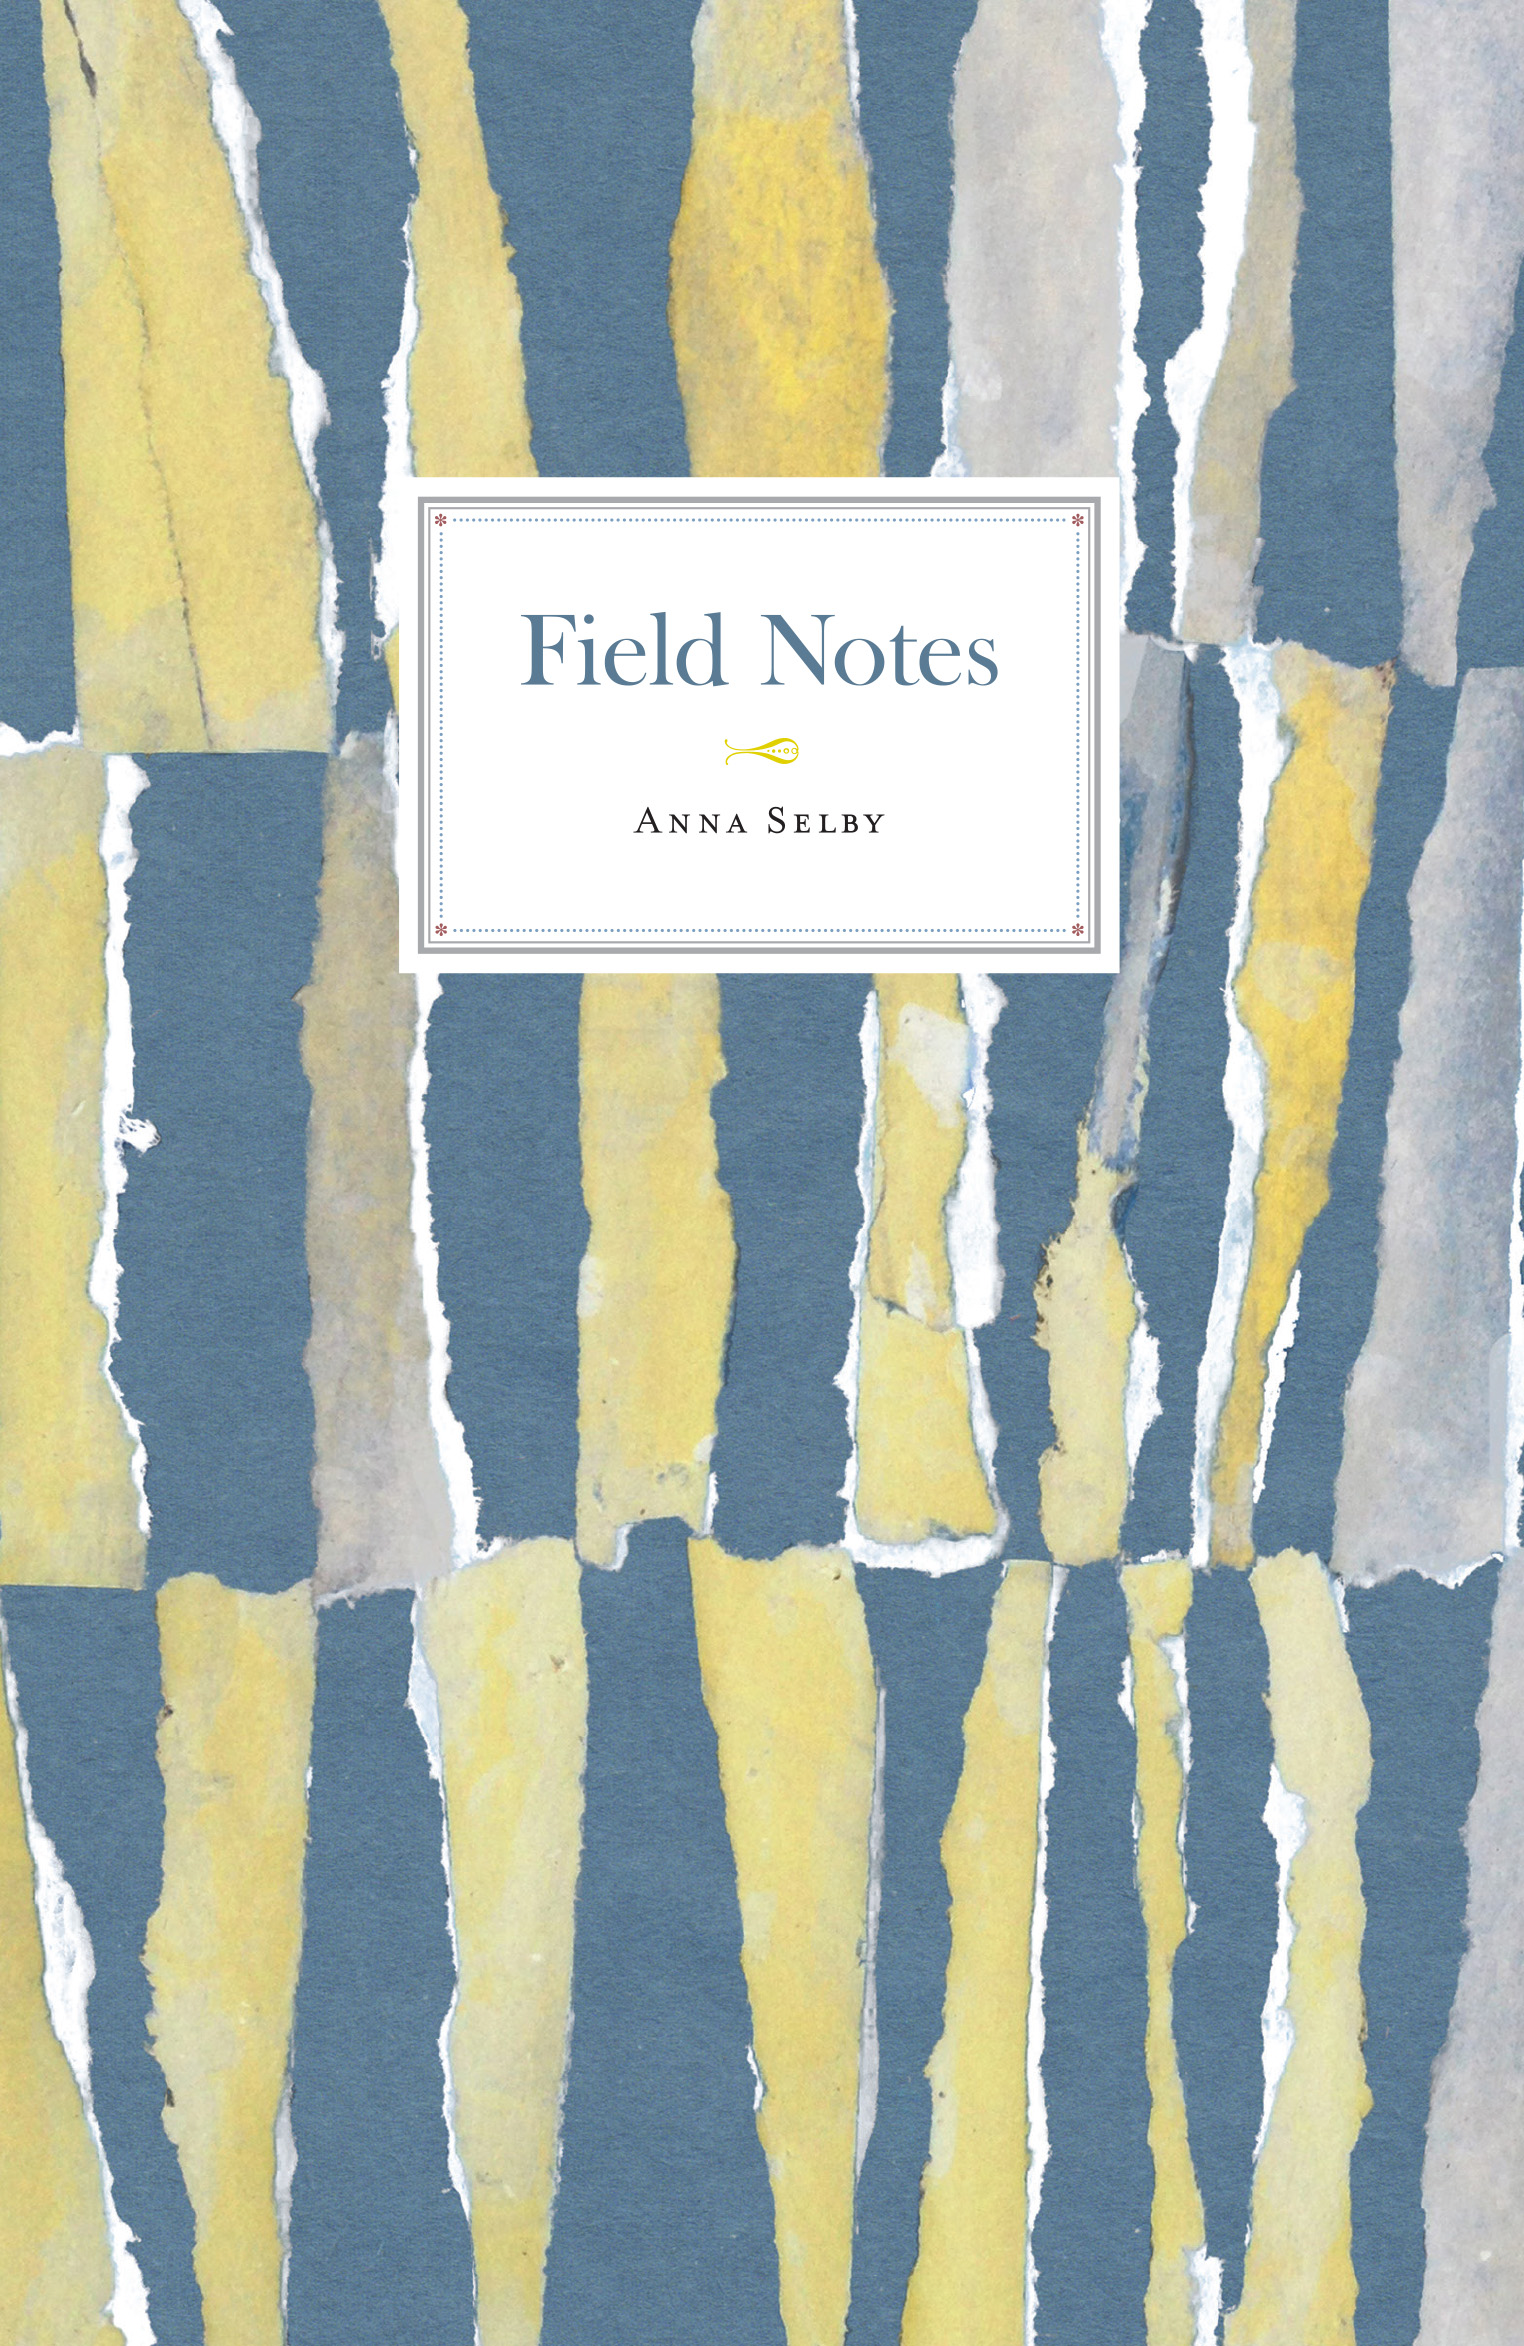 Field Notes, Anna Selby. Ebook format only